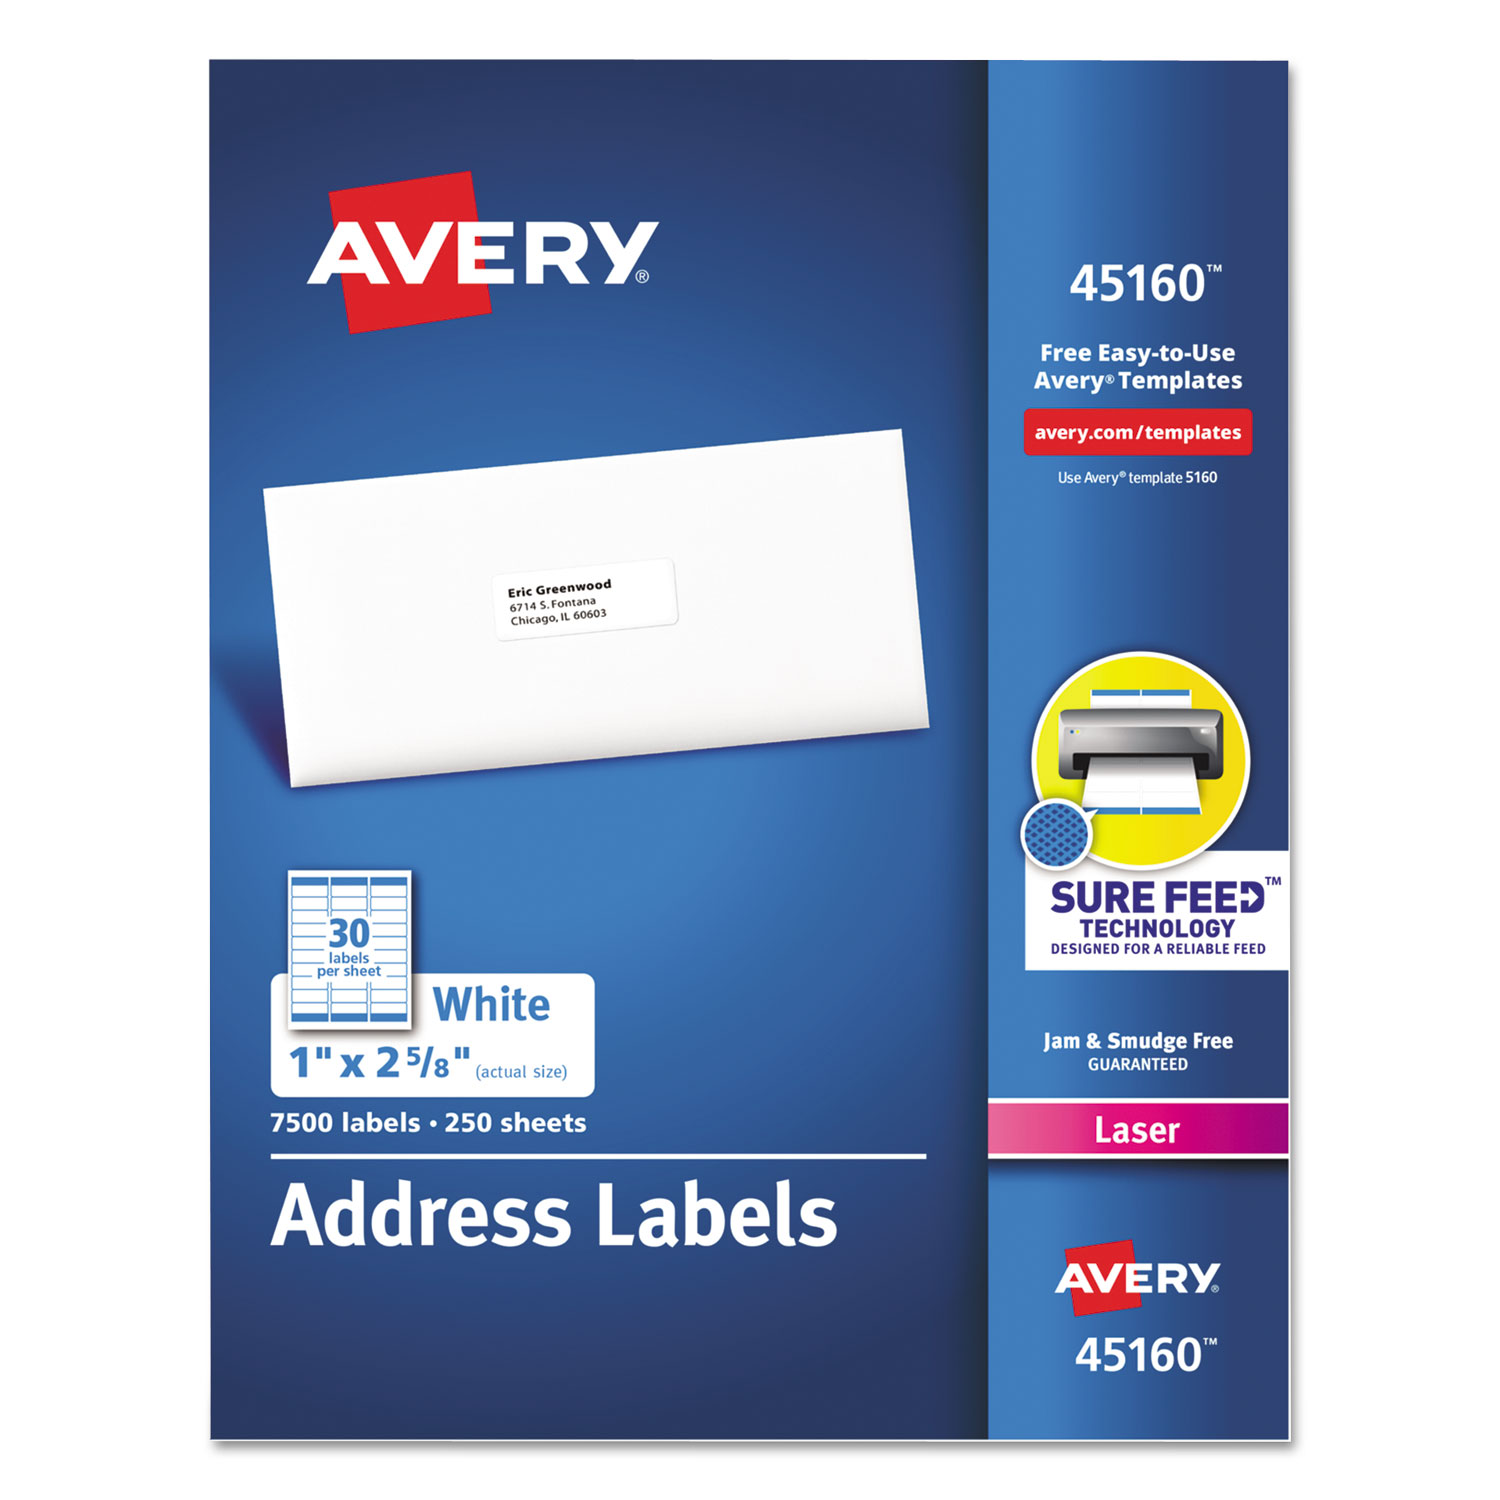 4 1/4 x 2 1/8 1,000ct. Avery Shipping Tags Manila Paper/Double Wire